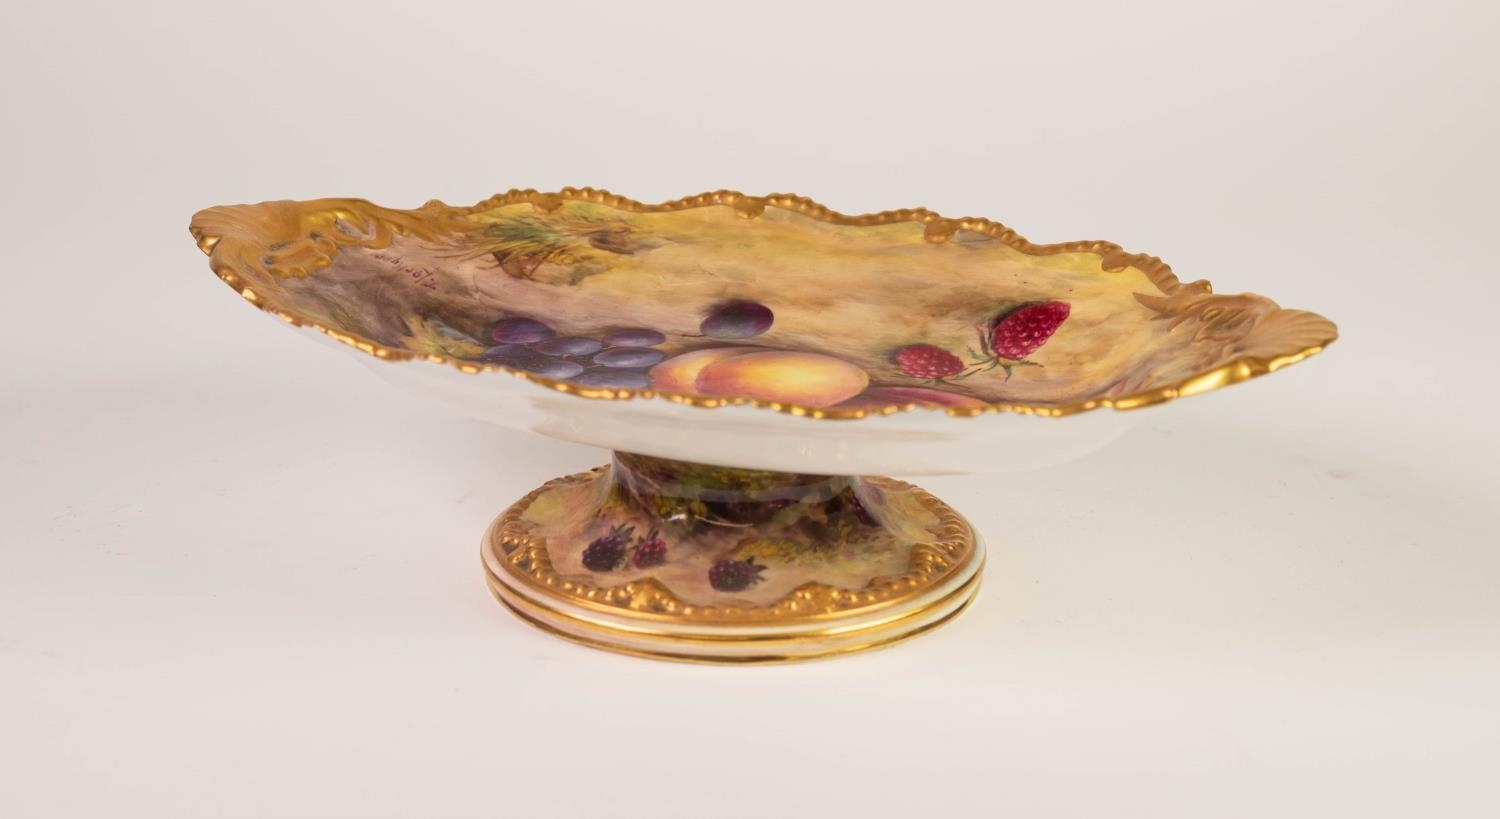 EARLY 20th CENTURY ROYAL WORCESTER PORCELAIN OVAL LOW PEDESTAL COMPORT, painted with fruit, signed T - Image 2 of 3